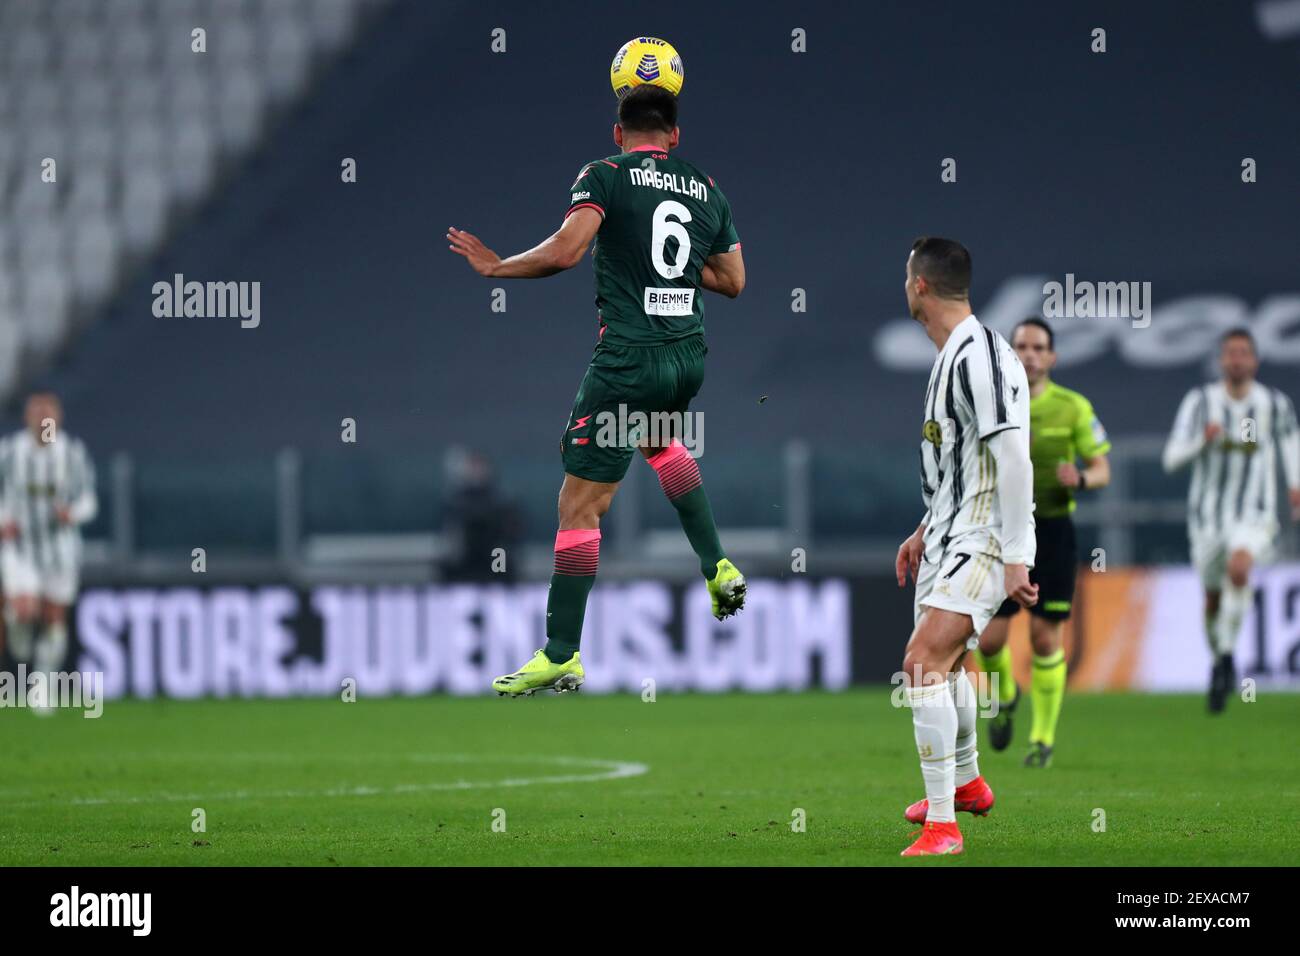 Lisandro Magallan of Fc Crotone  in action during the Serie A match between Juventus Fc and Fc Crotone. Juventus Fc wins 3-0 over Fc Crotone. Stock Photo